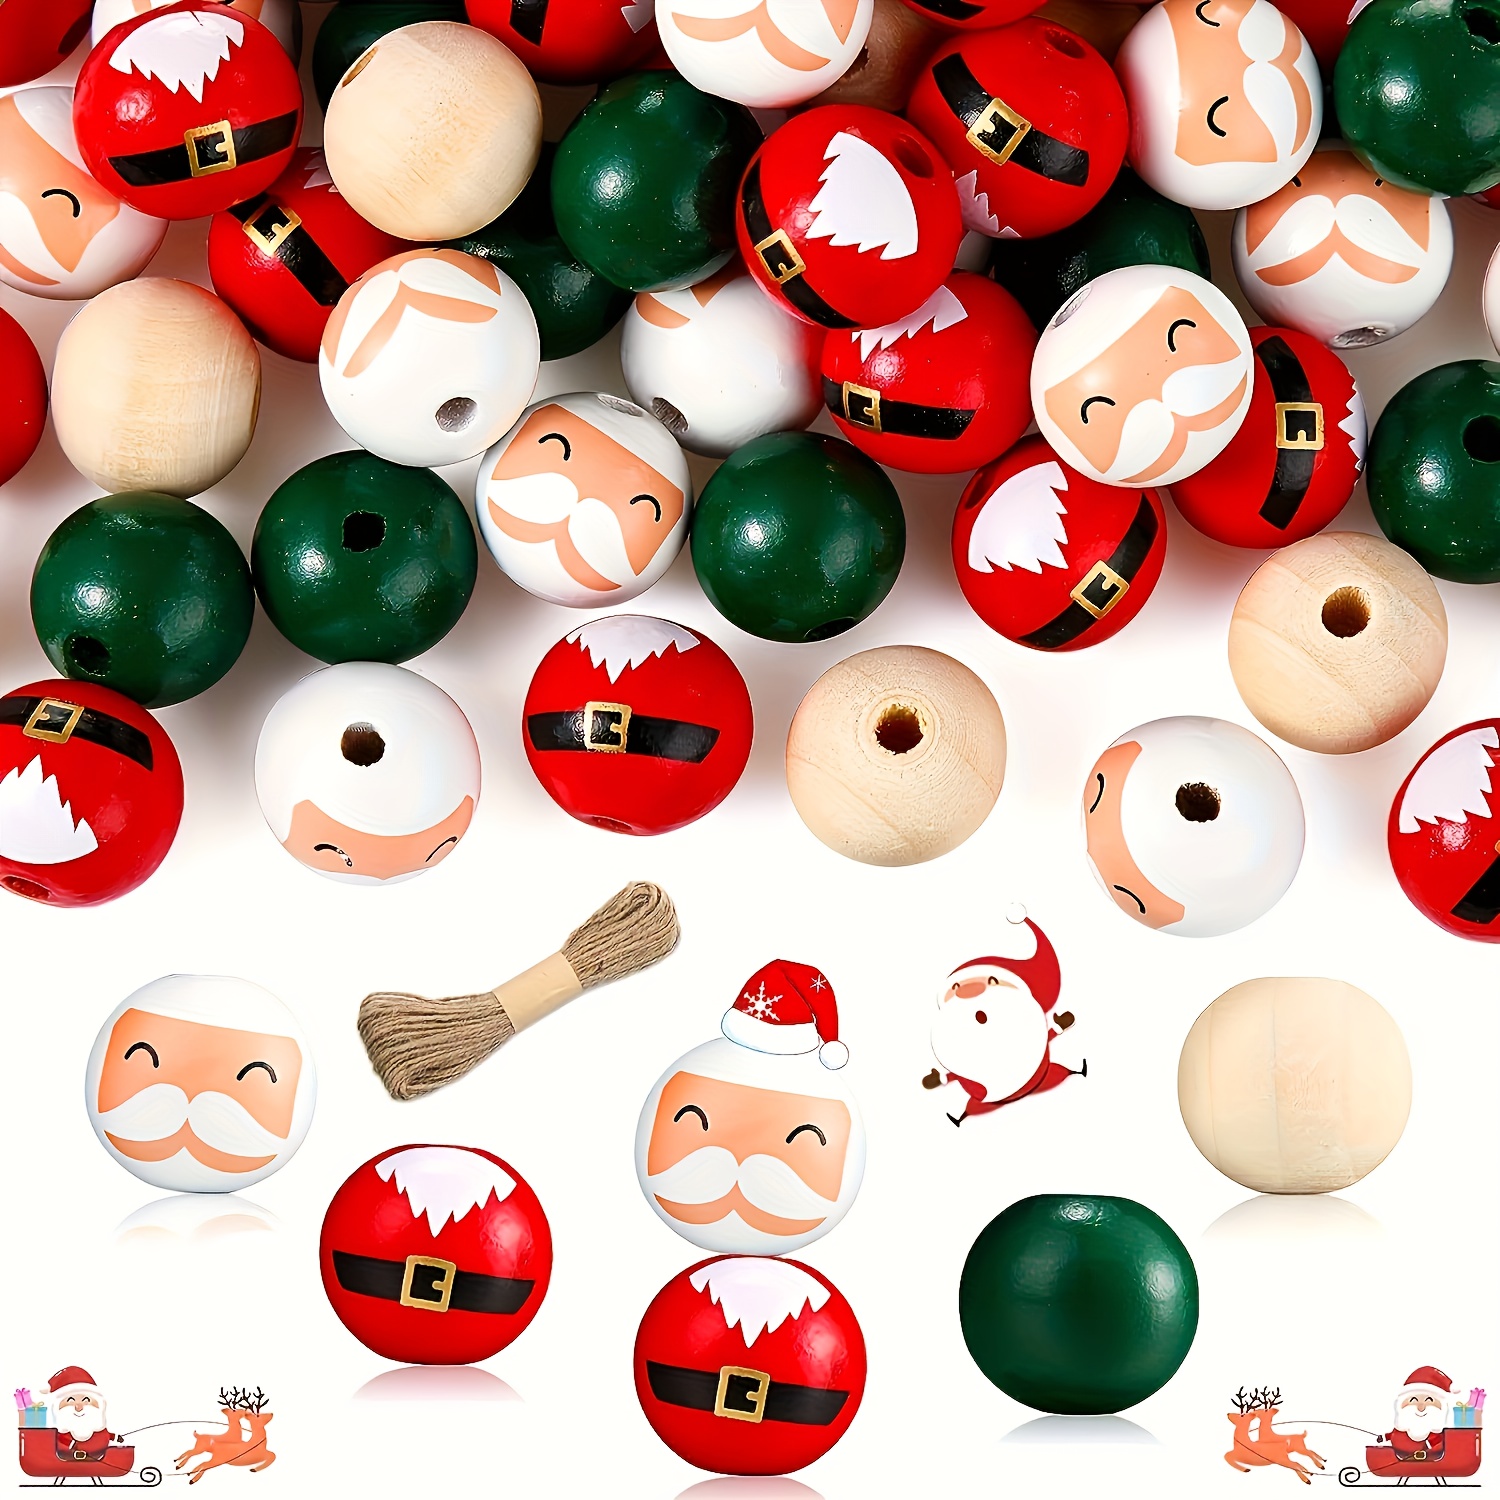 

40pcs Natural Wooden Beads Christmas Decorations, Red And Green, Diy Craft Supplies For Holiday Party Decorations